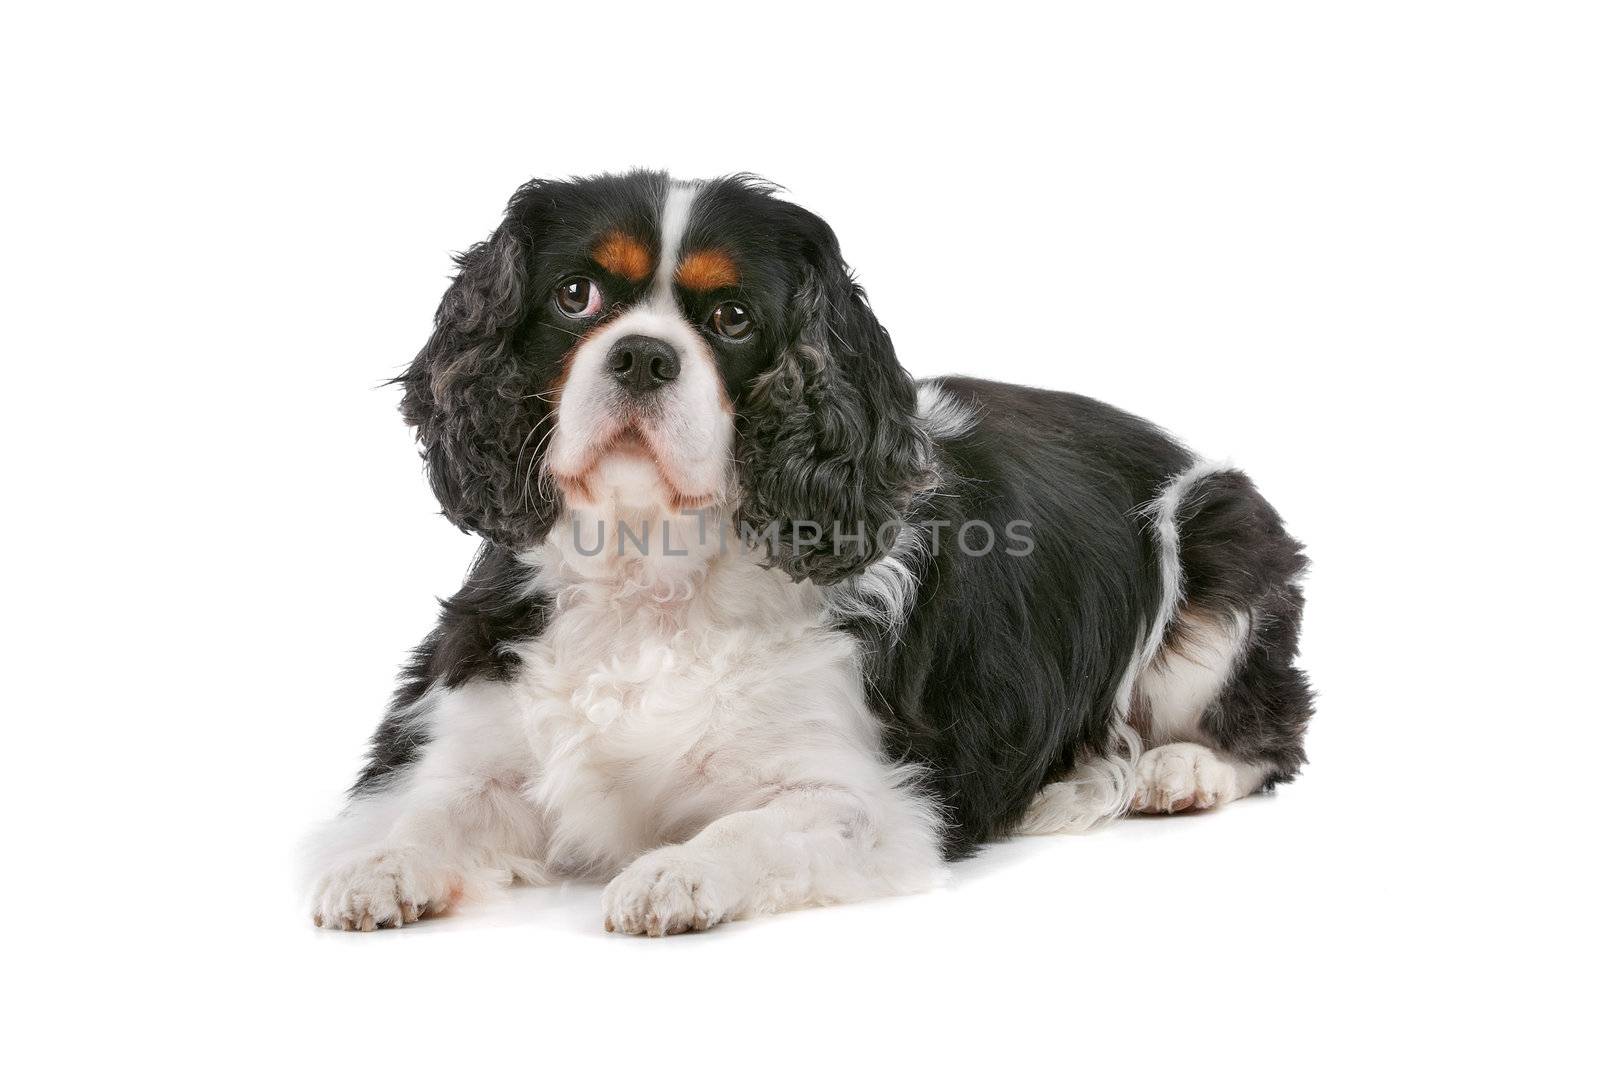 Cute Cavalier King Charles Spaniel dog looking at camera, on a white background